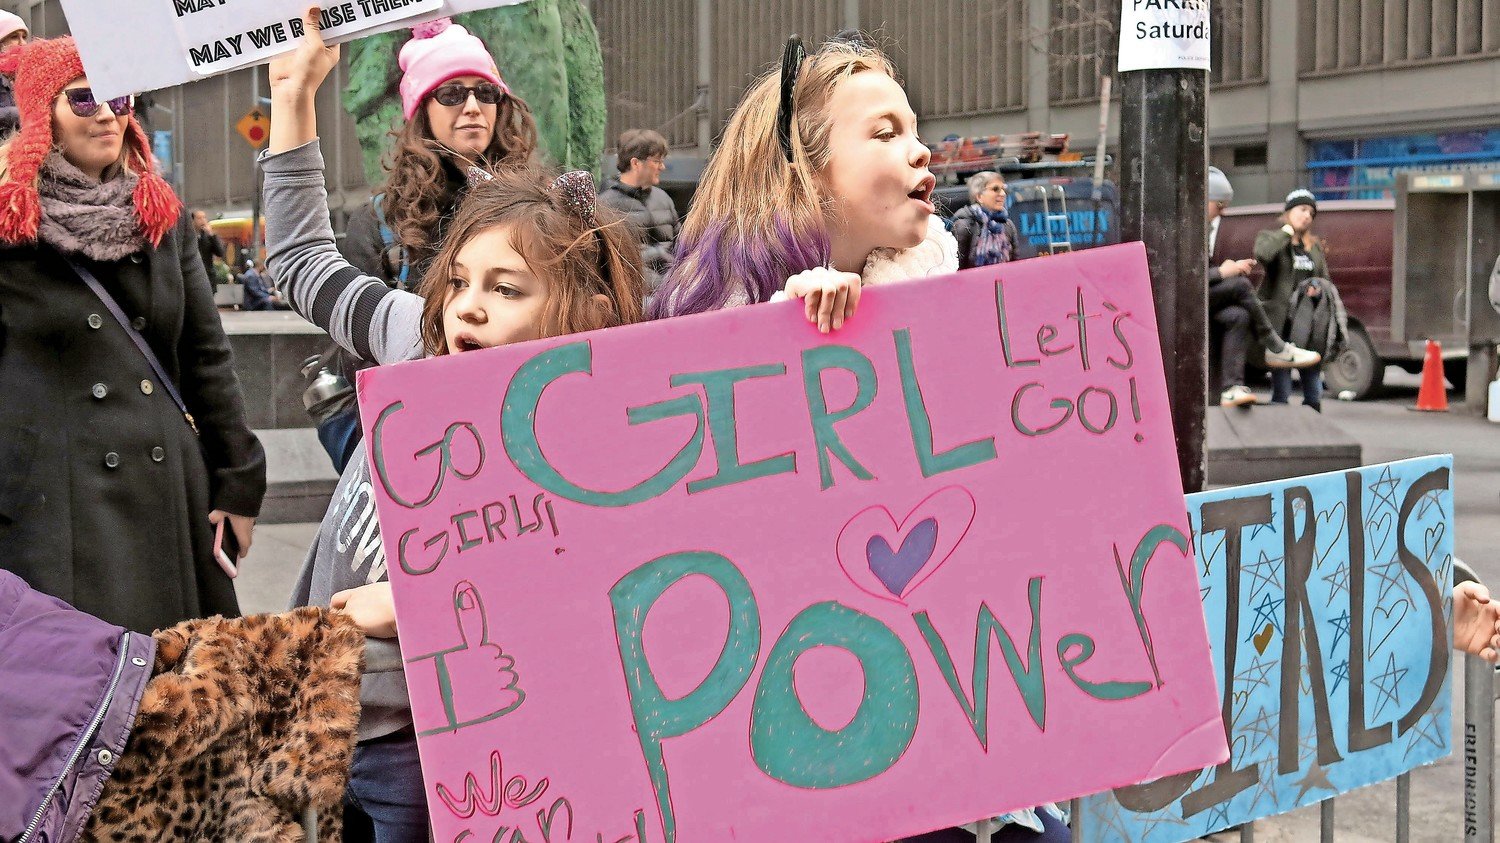 Girls with homemade signs chanted alongside adults at a New York City Women’s March in 2018. Senate District 8 has organized a series of women-focused webinars.